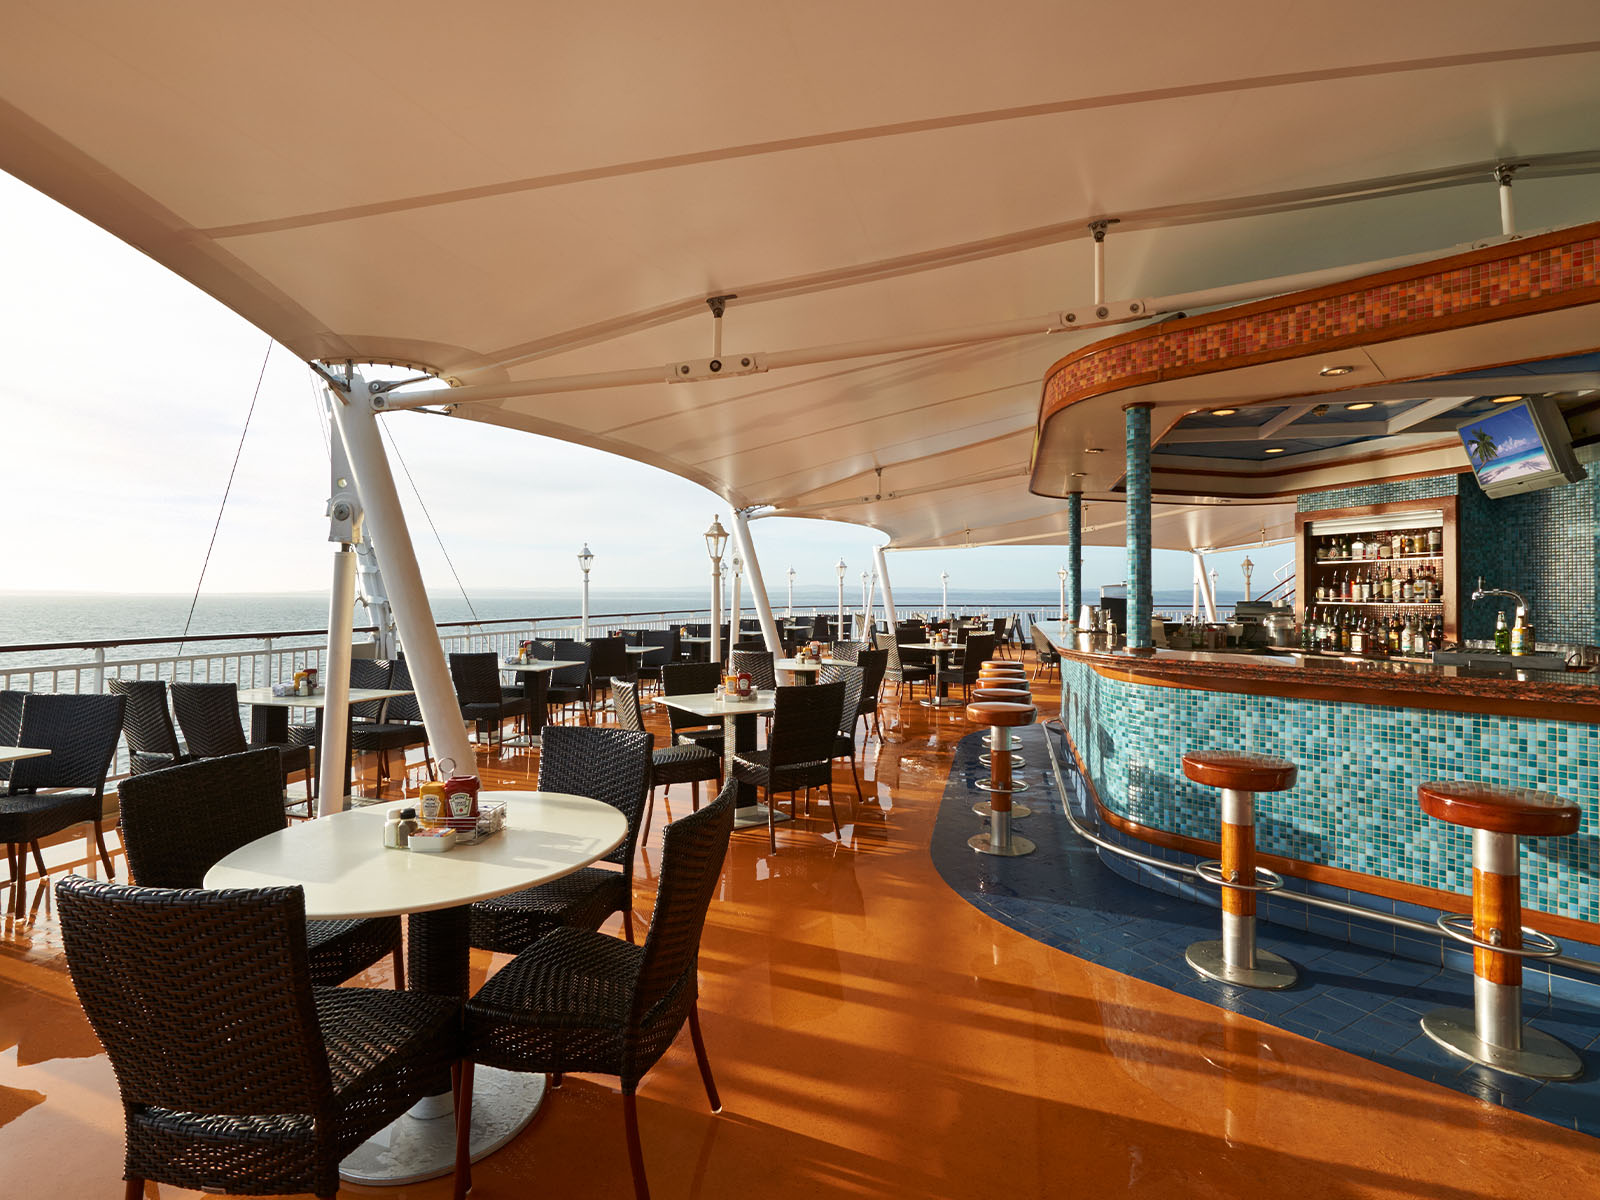 Great Outdoors Cafe on the Norwegian Jade